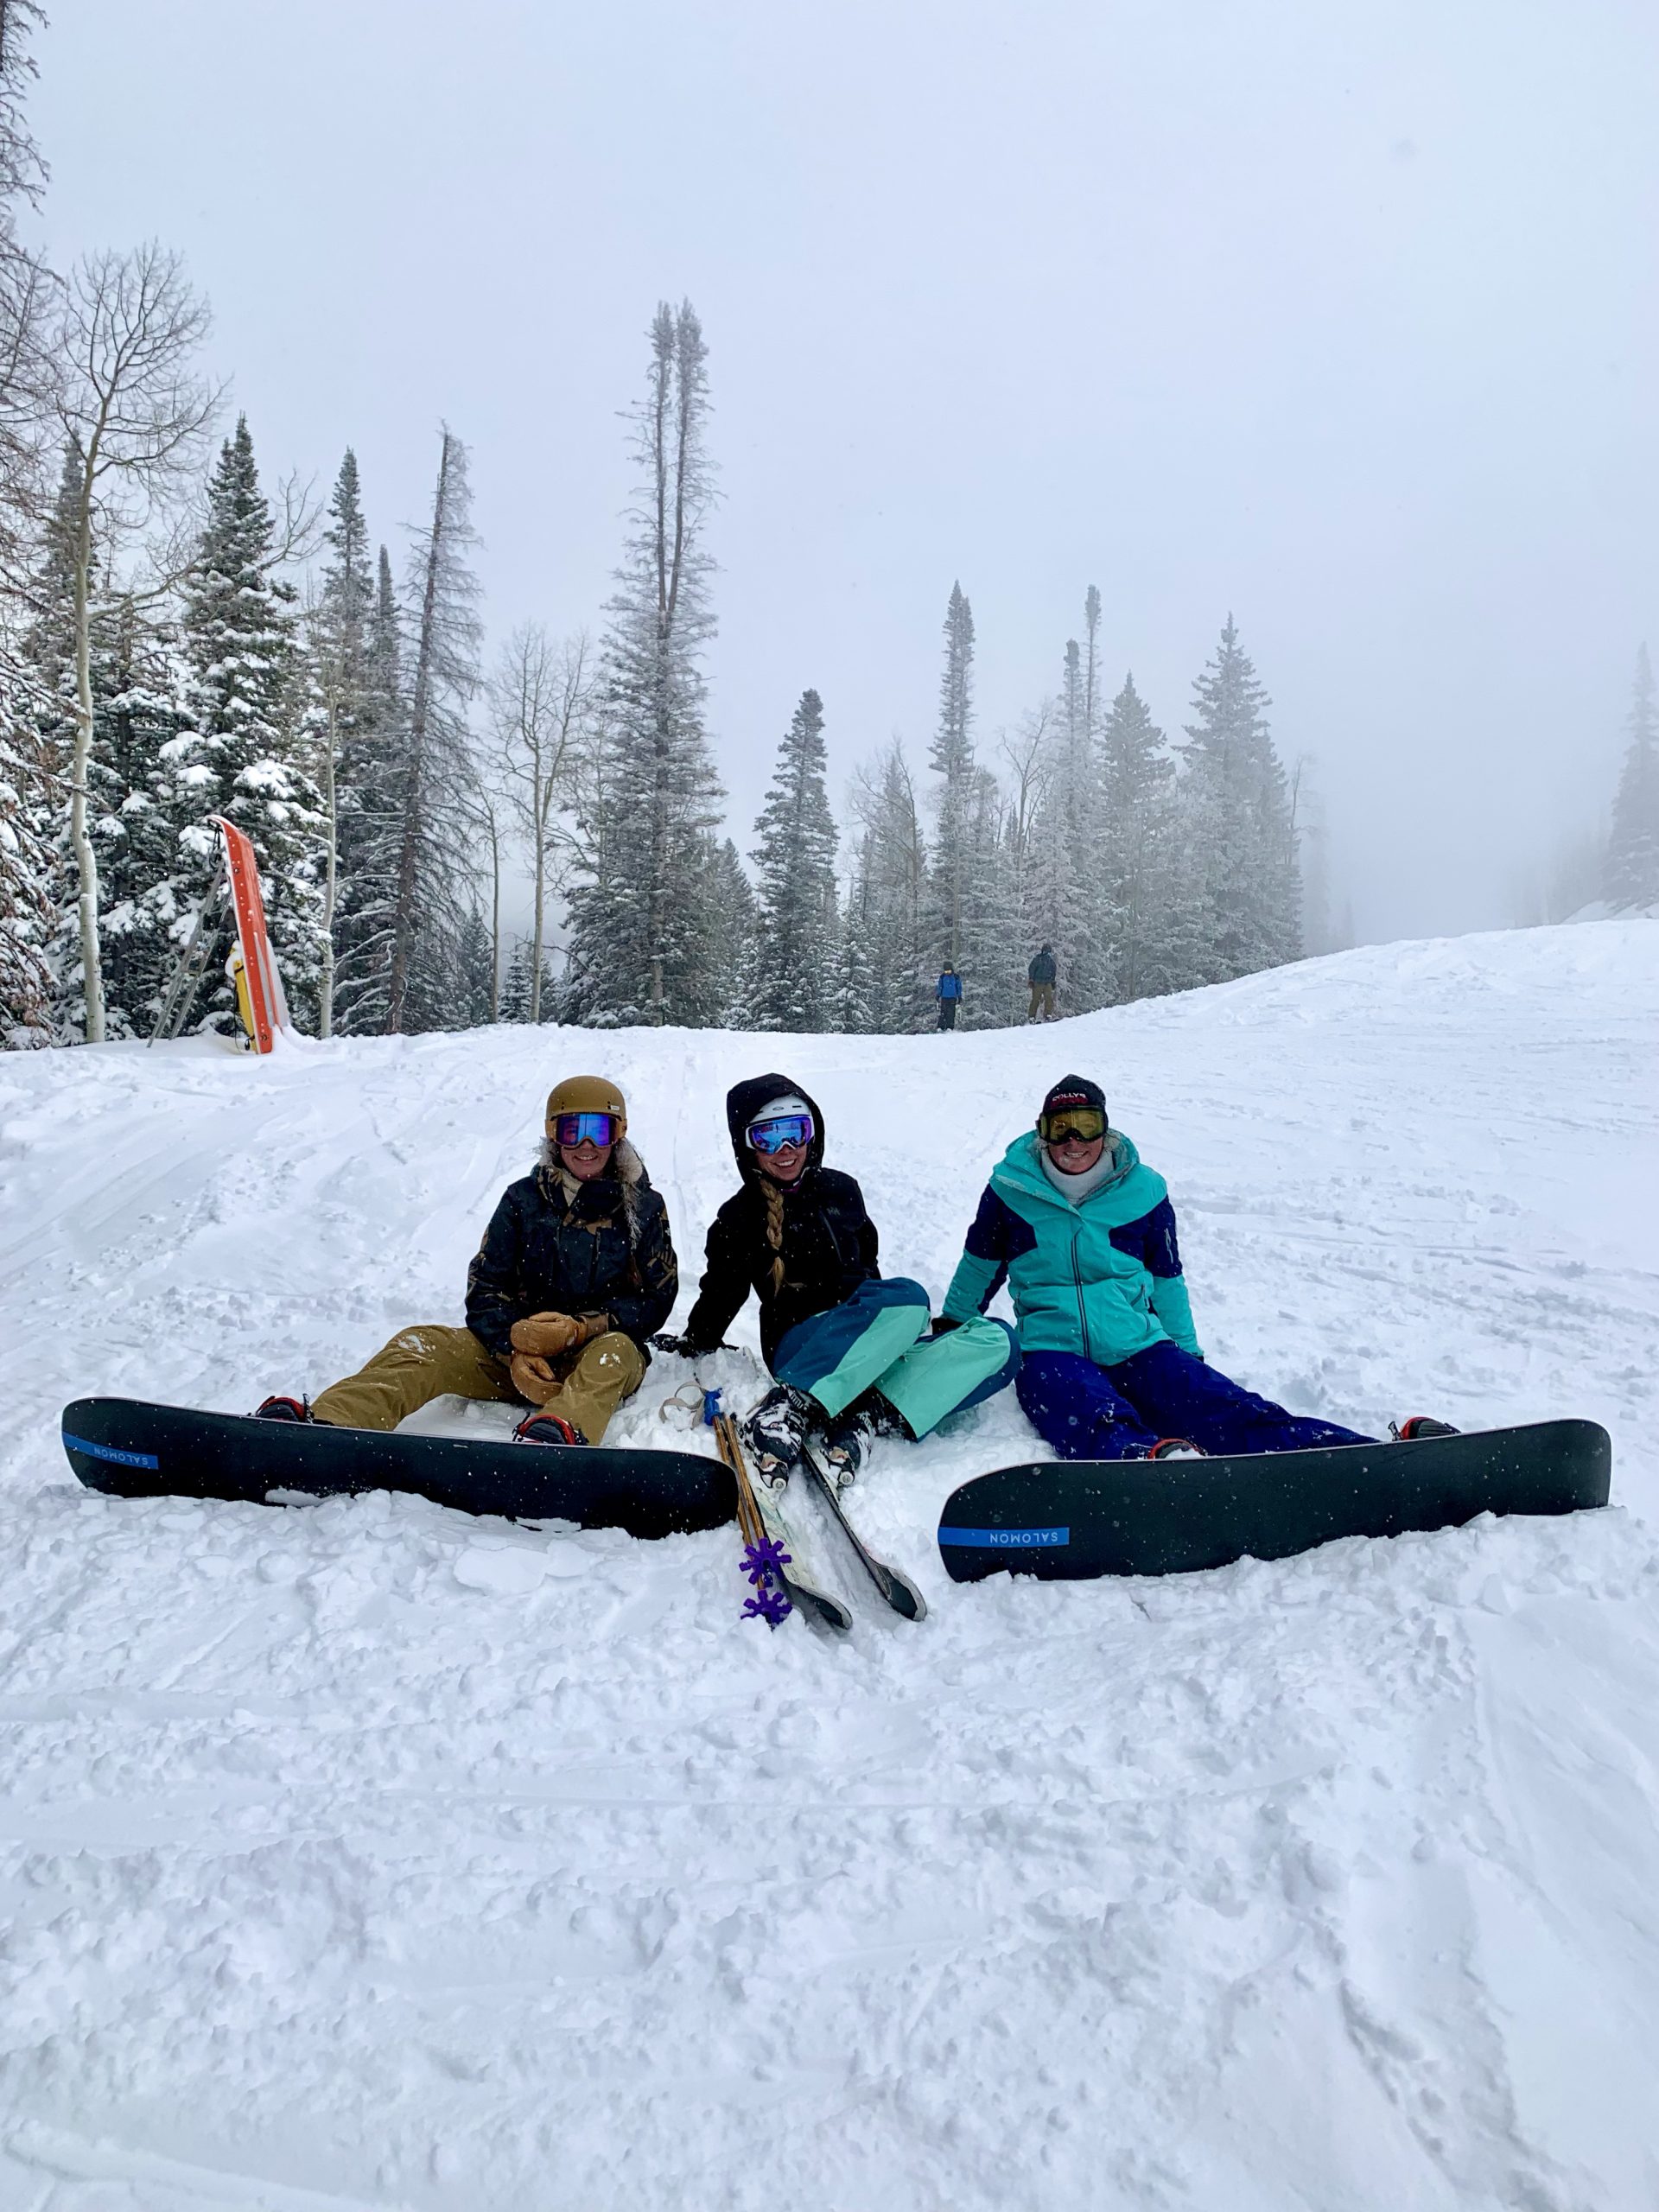 Powder, Lambs, and Moab – March 2022 Routt Recap